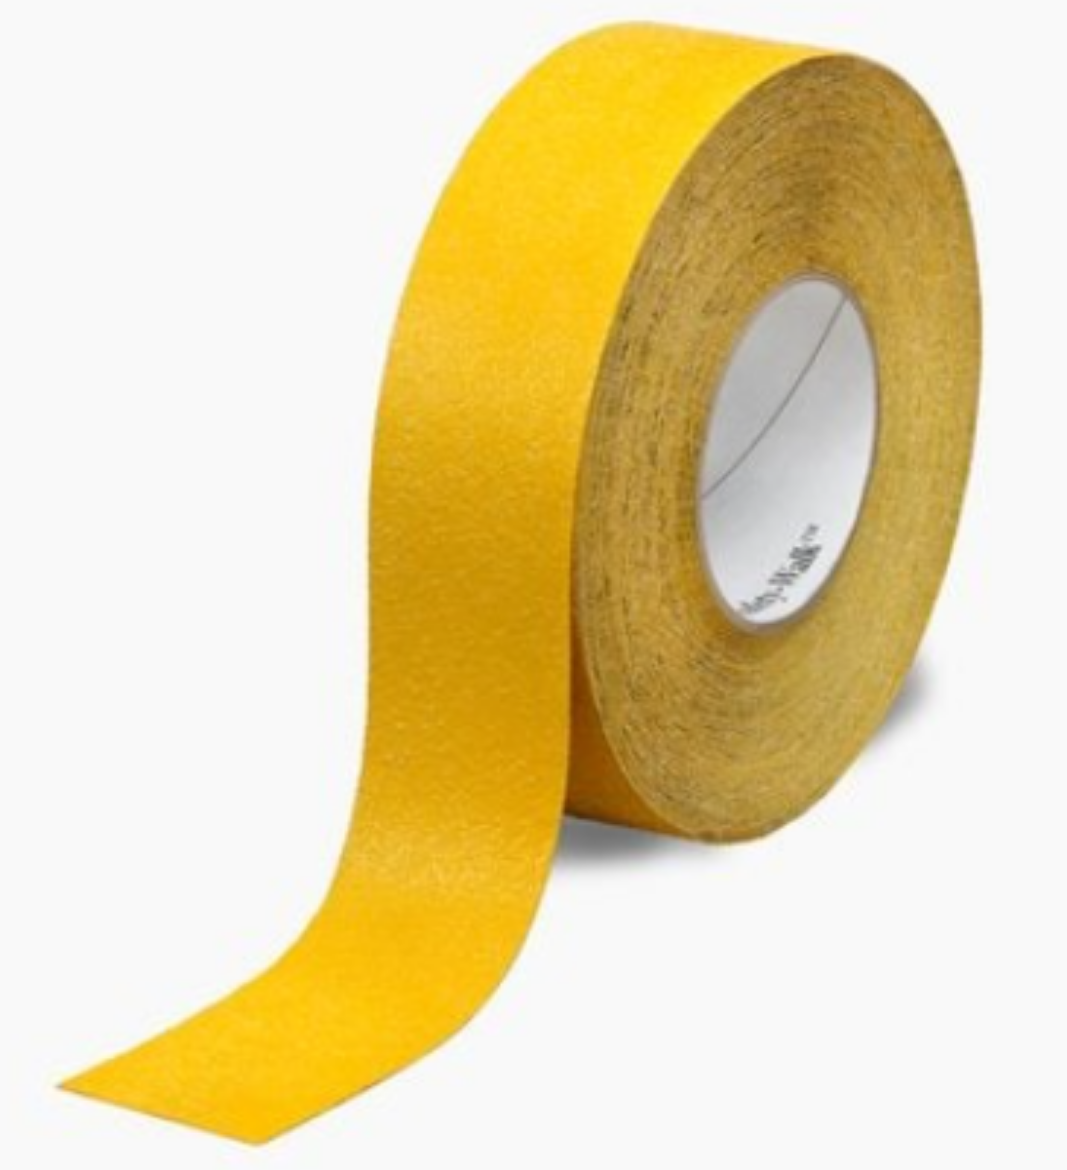 Picture of 3M™ Safety-Walk™ Slip-Resistant Conformable Tapes and Treads 530, Safety Yellow, 50mm x 18.3m